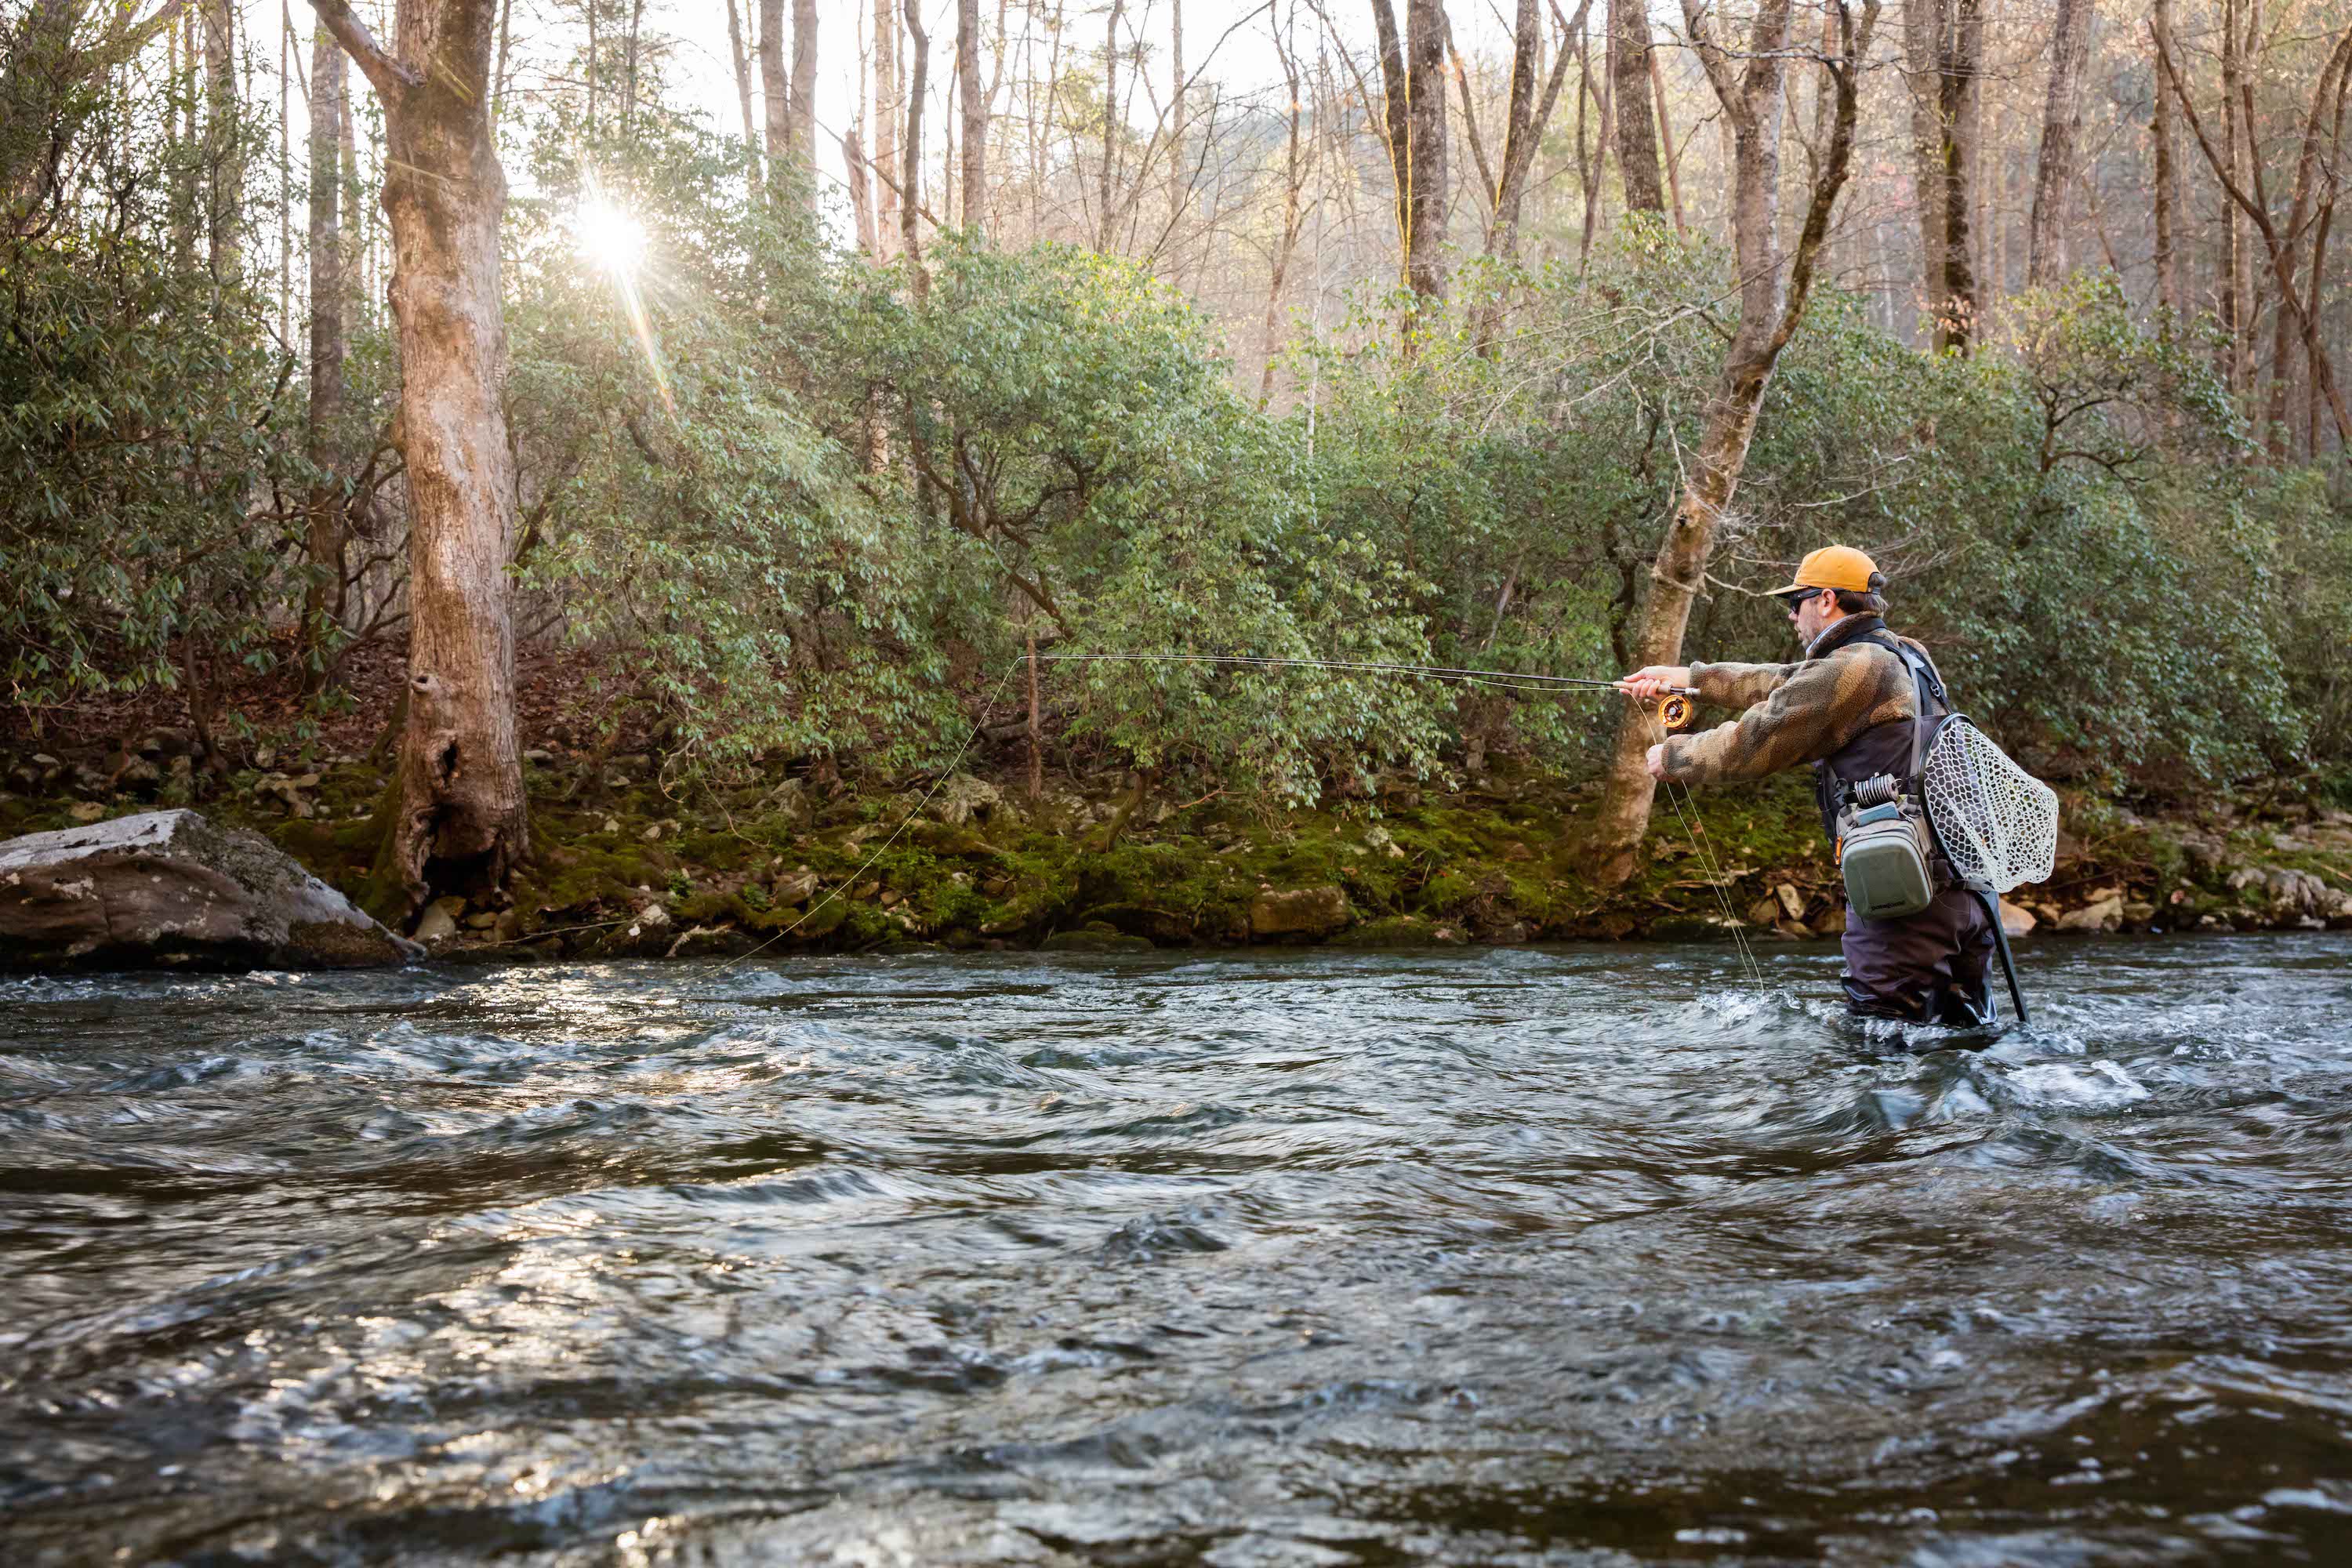 Fly fishing for trout in Western North Carolina